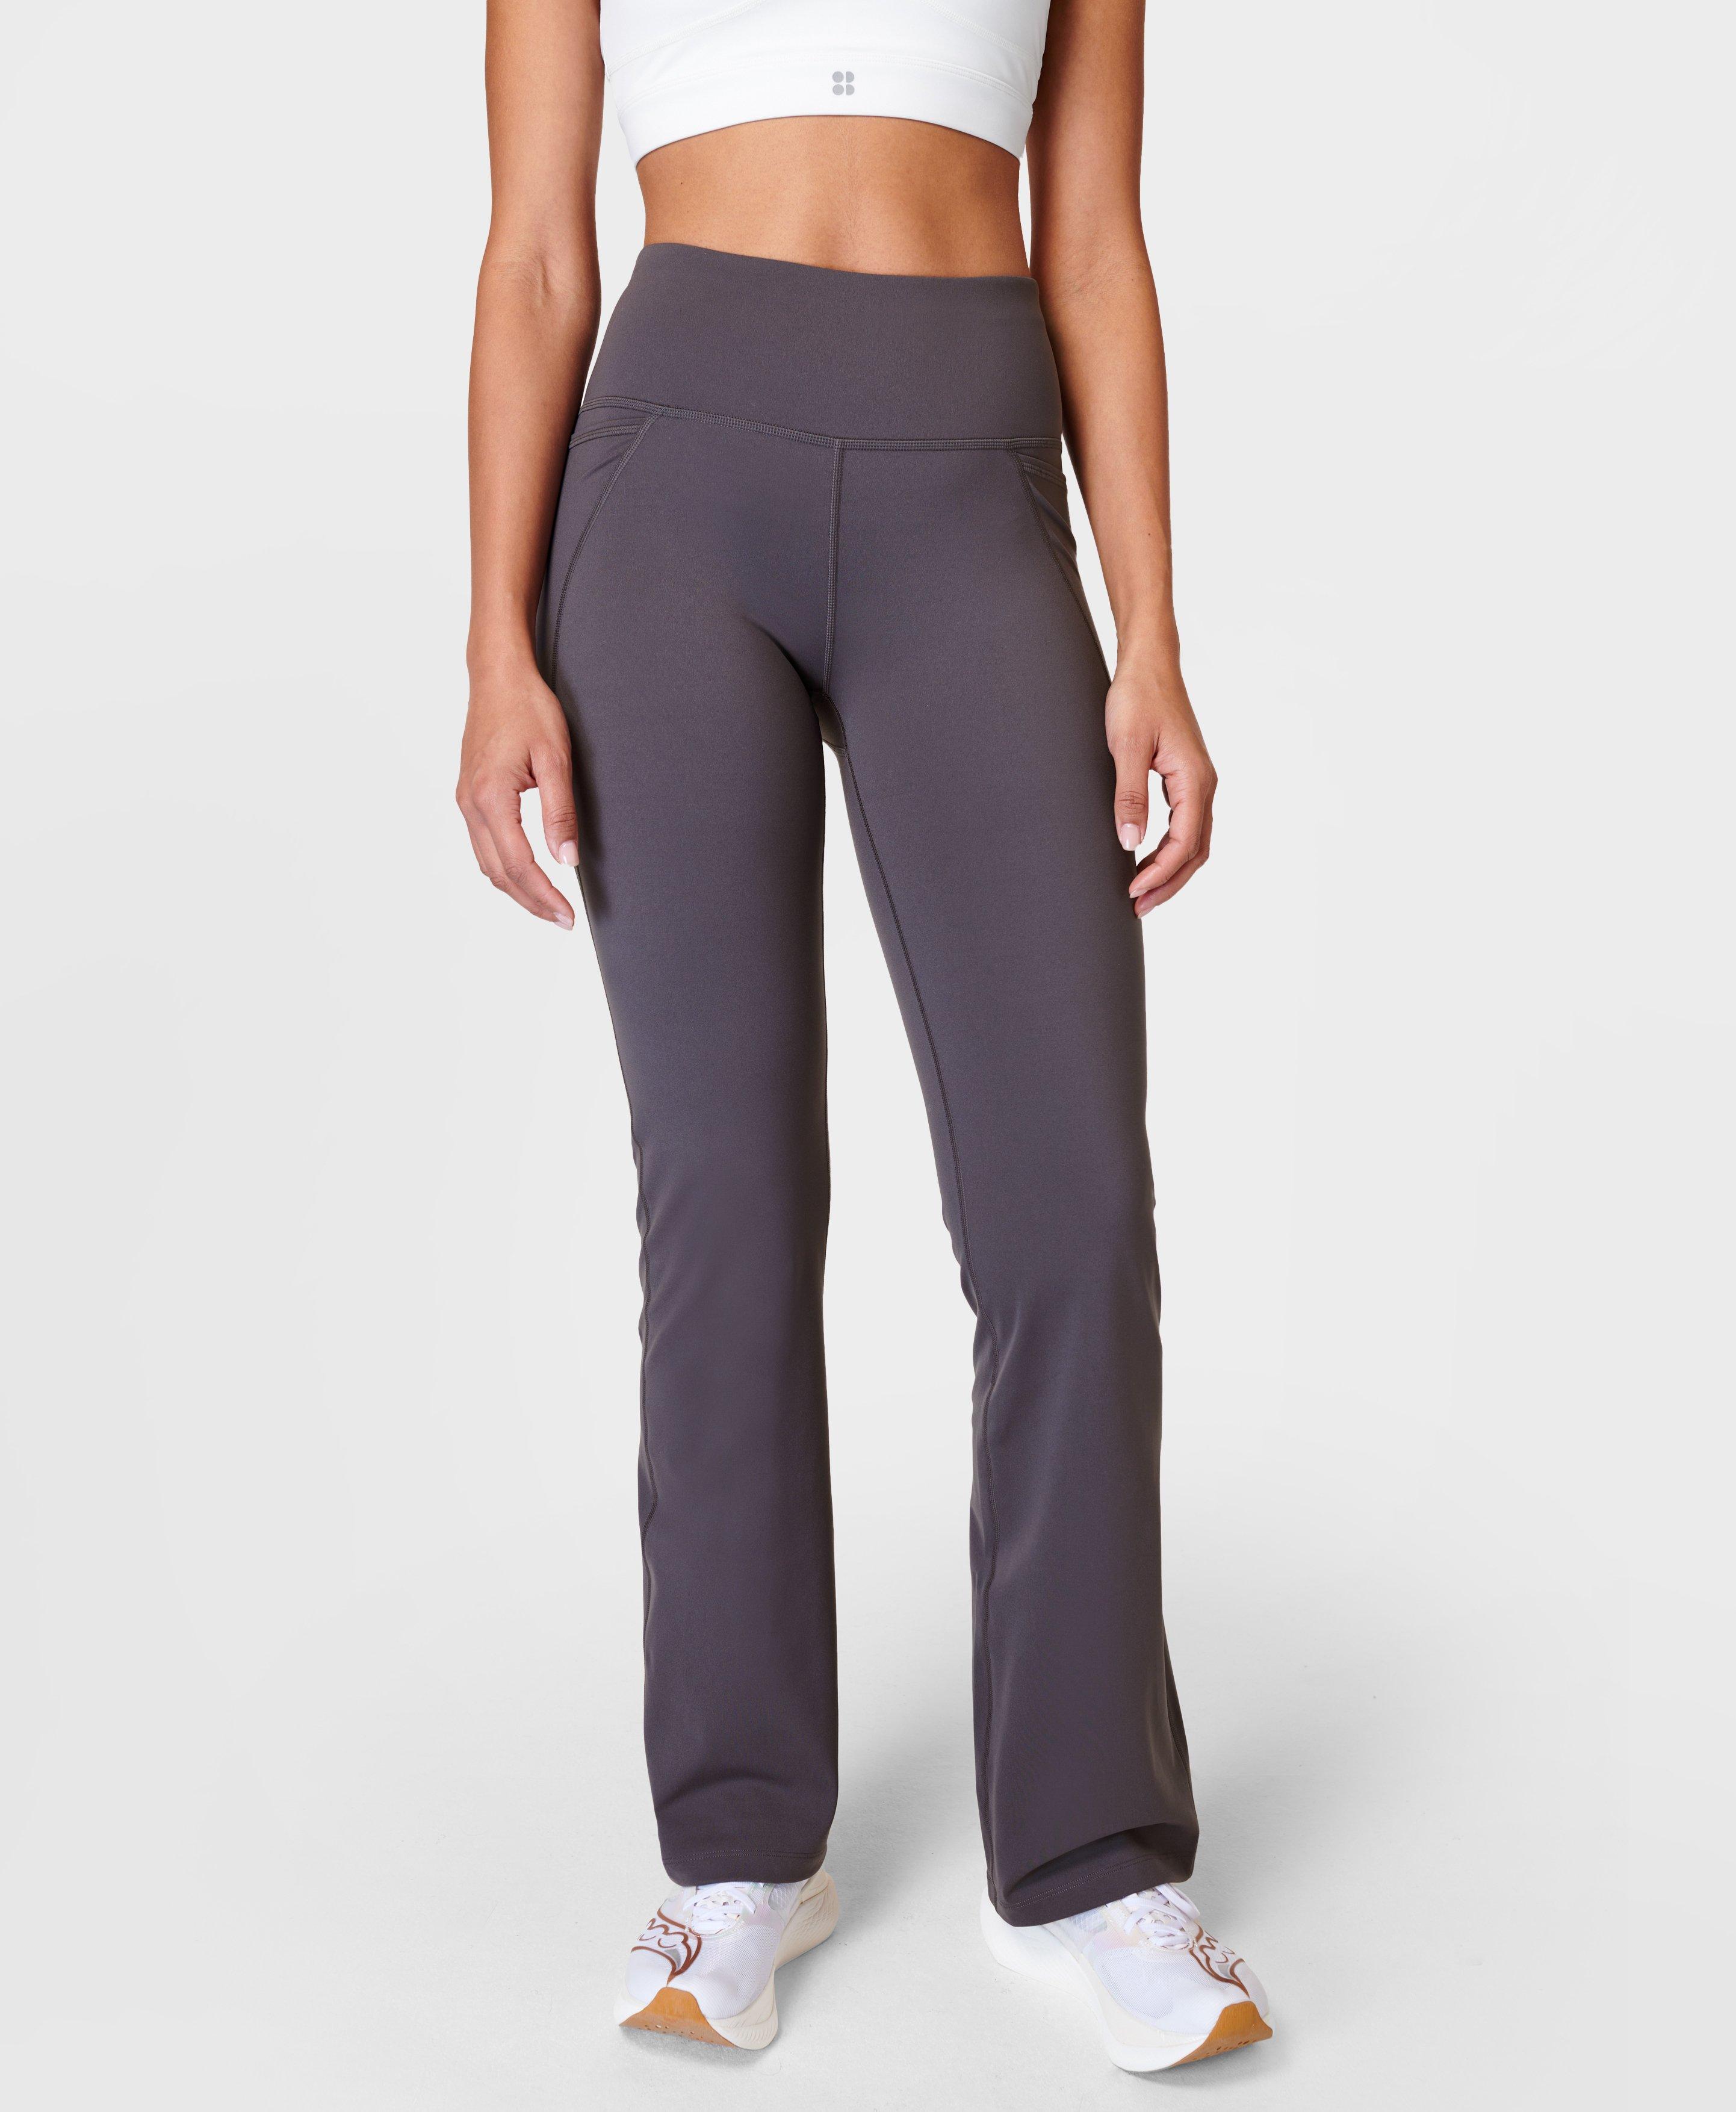 Womens Flare Yoga Pants V Waist Flared Leggings High Waisted Bootcut Workout  Pants Tummy Control From Lazylace, $19.46 | DHgate.Com